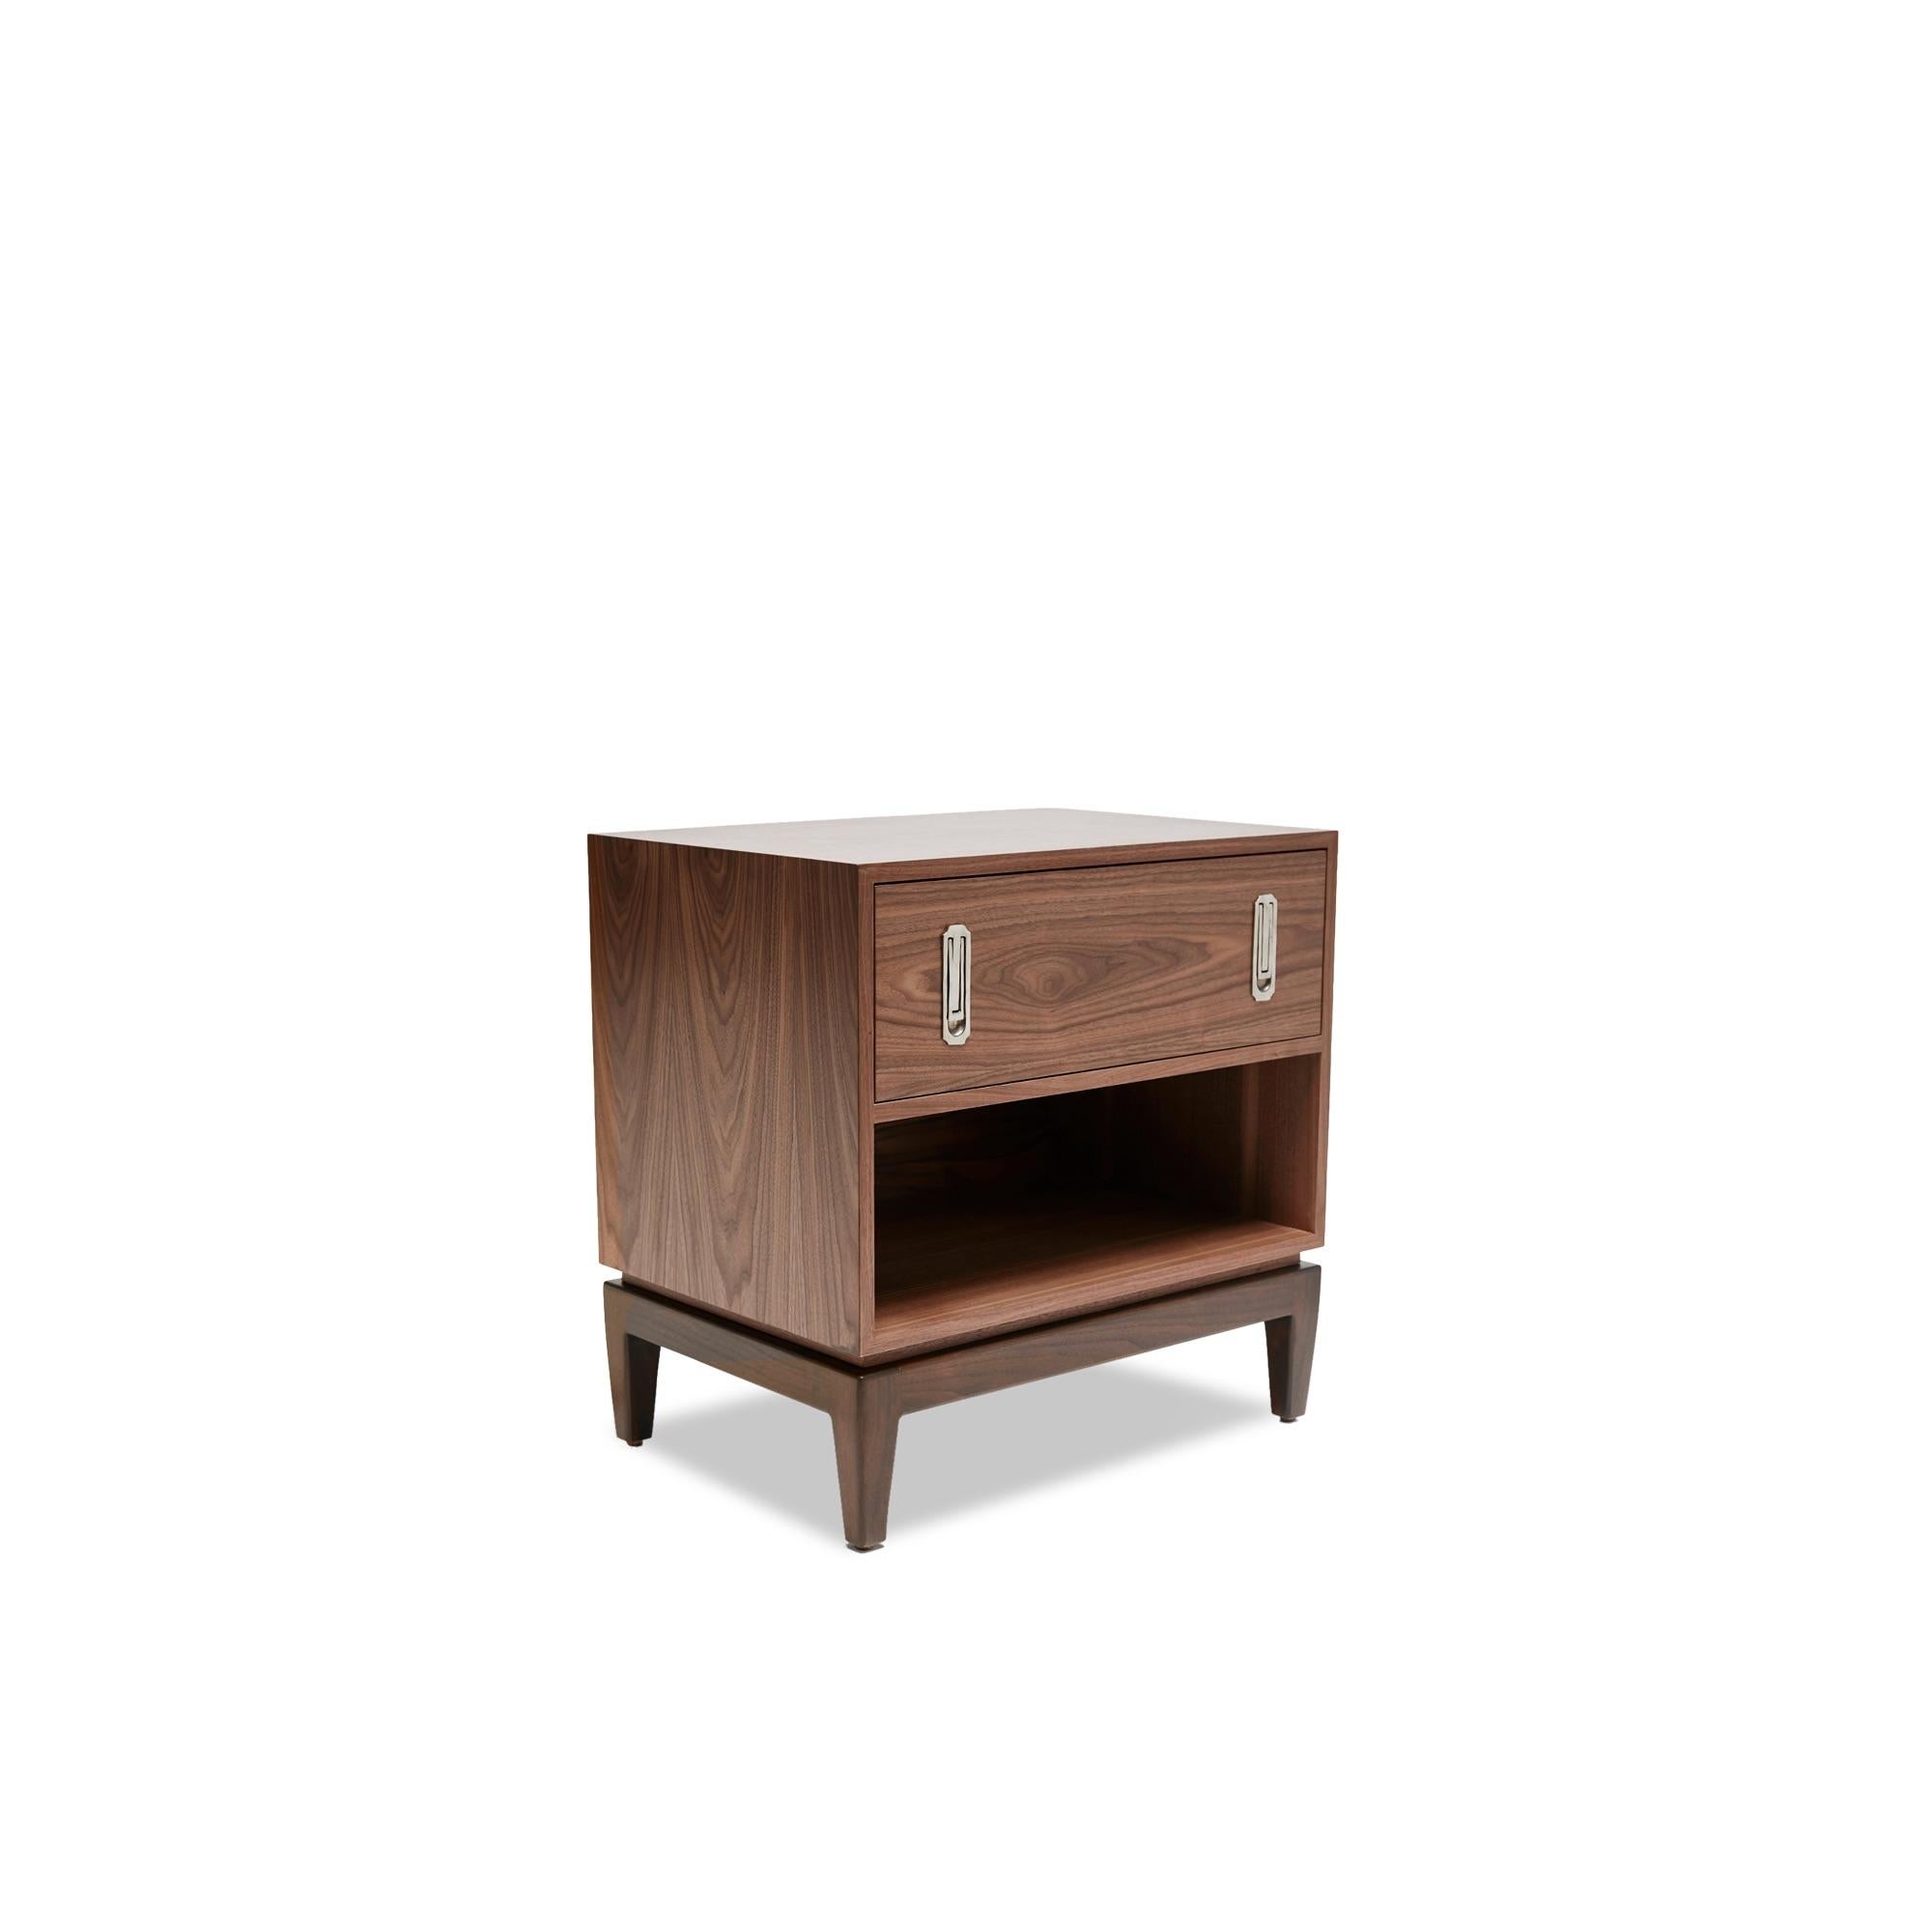 The Arcadia Side Table features one or two drawers, an open shelf, hand crafted vintage style hardware and a sculptural solid American walnut or white oak base.

The Arcadia Side Table features one or two drawers, an open shelf, hand crafted vintage